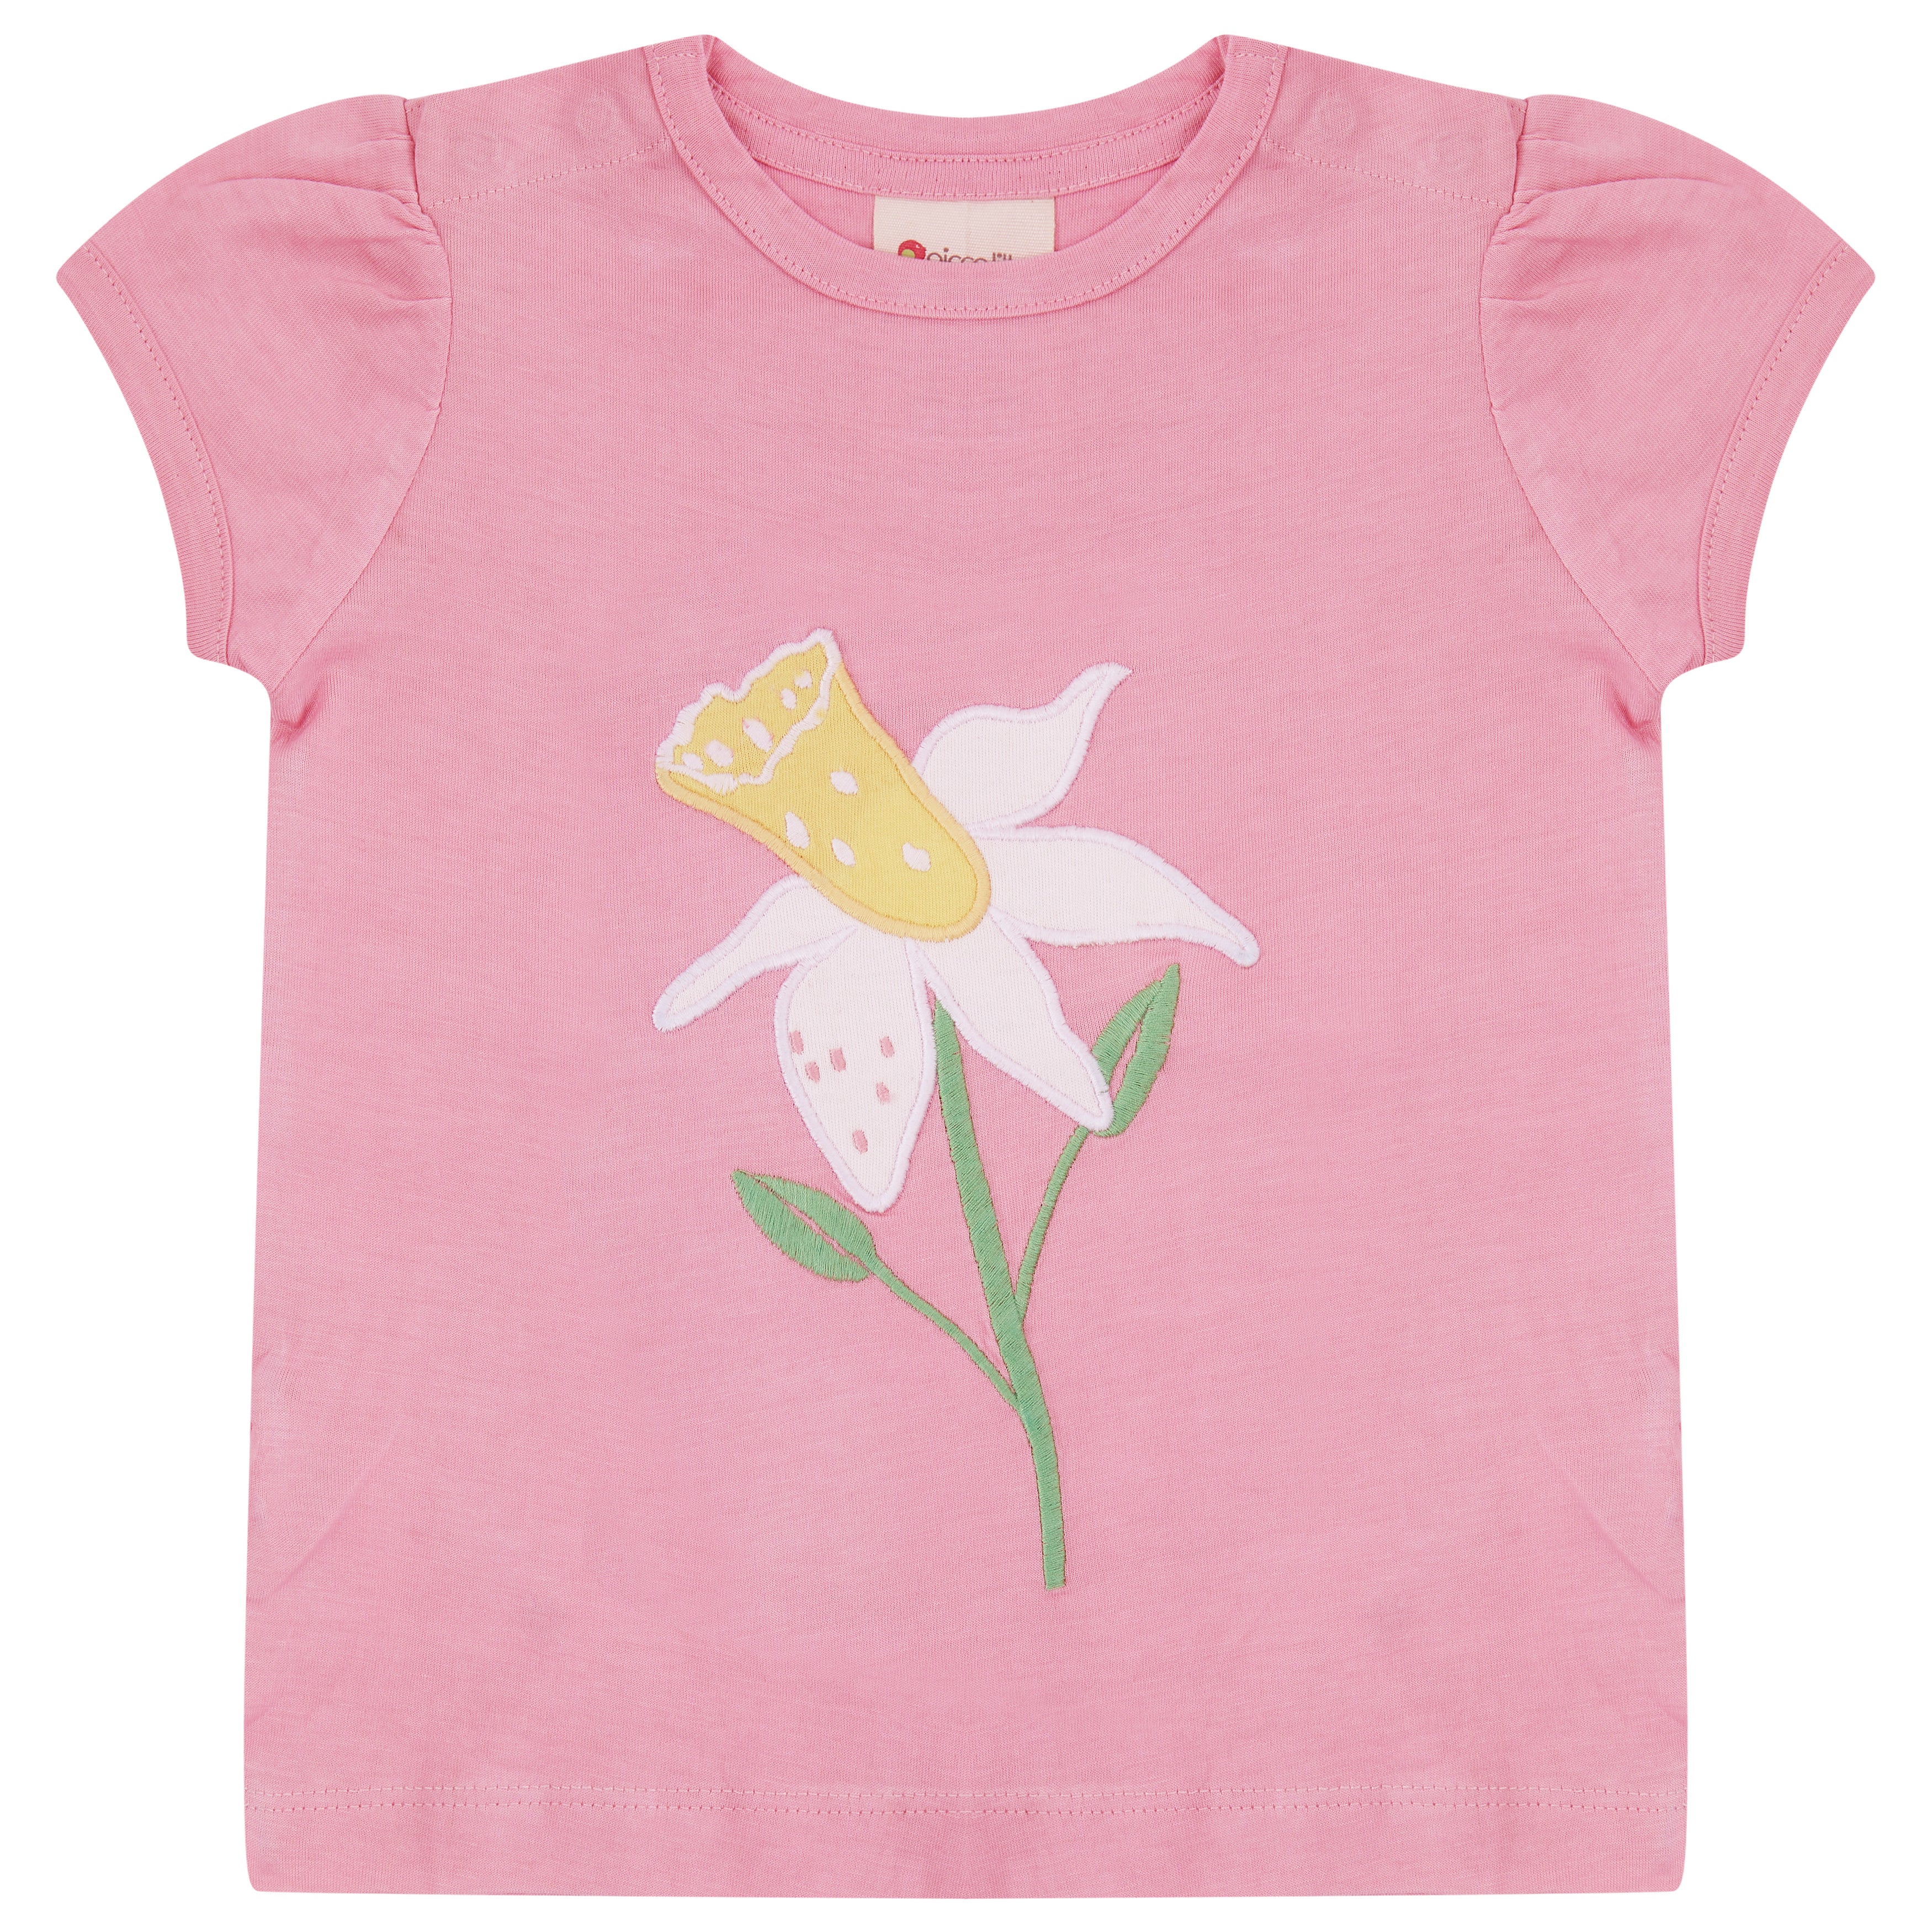 Piccalilly T-Shirt - Daffodil